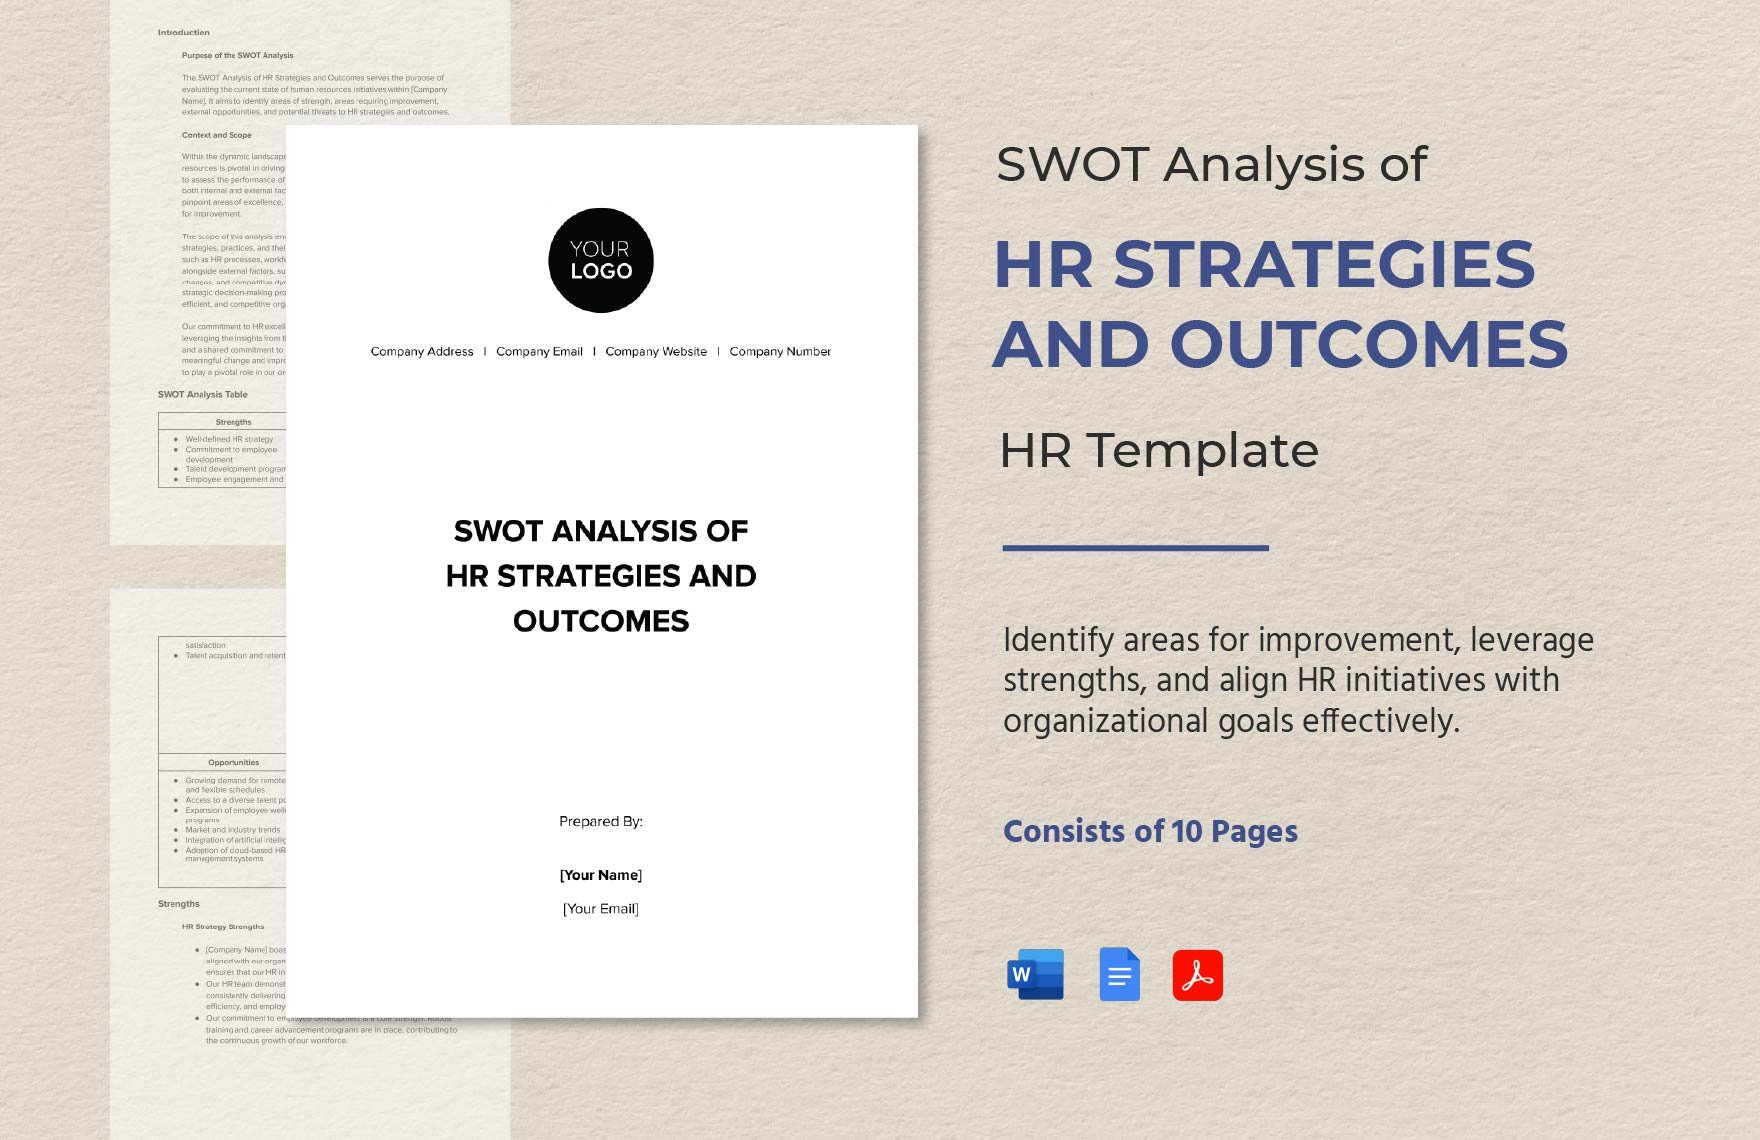 SWOT Analysis of HR Strategies and Outcomes HR Template